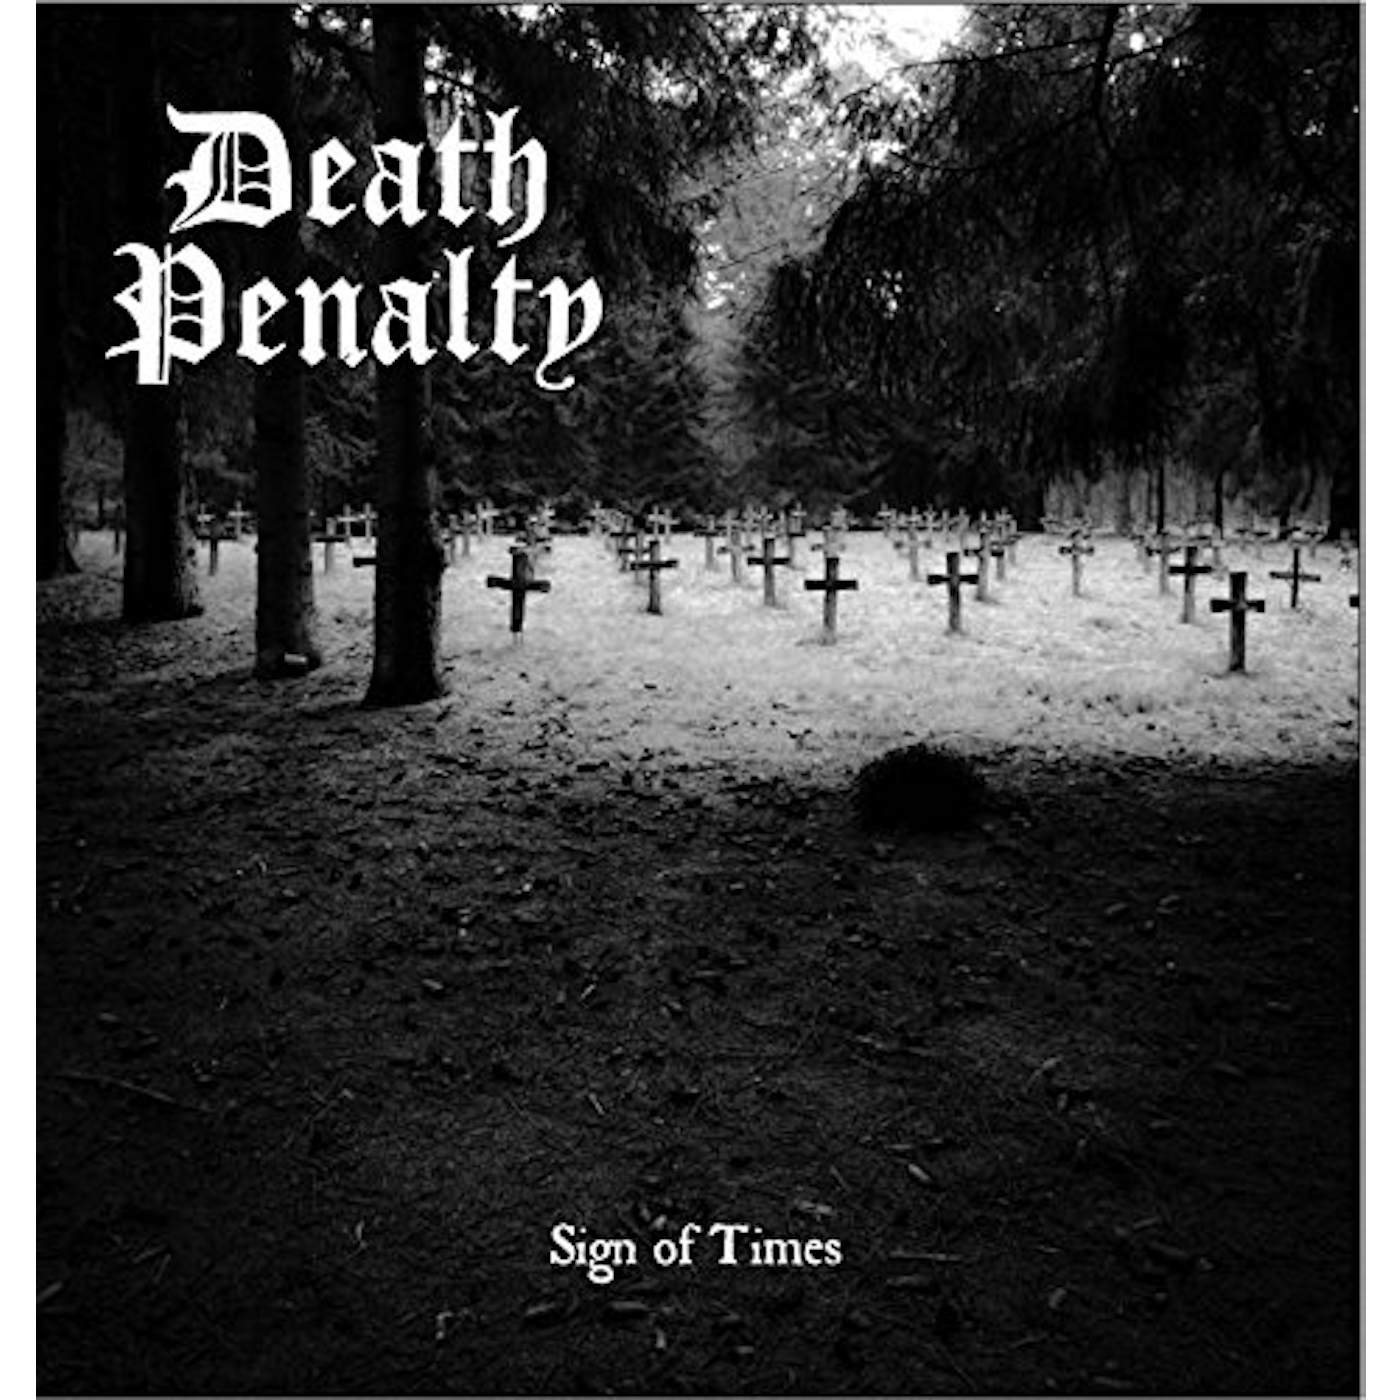 Death Penalty Sign of Times Vinyl Record